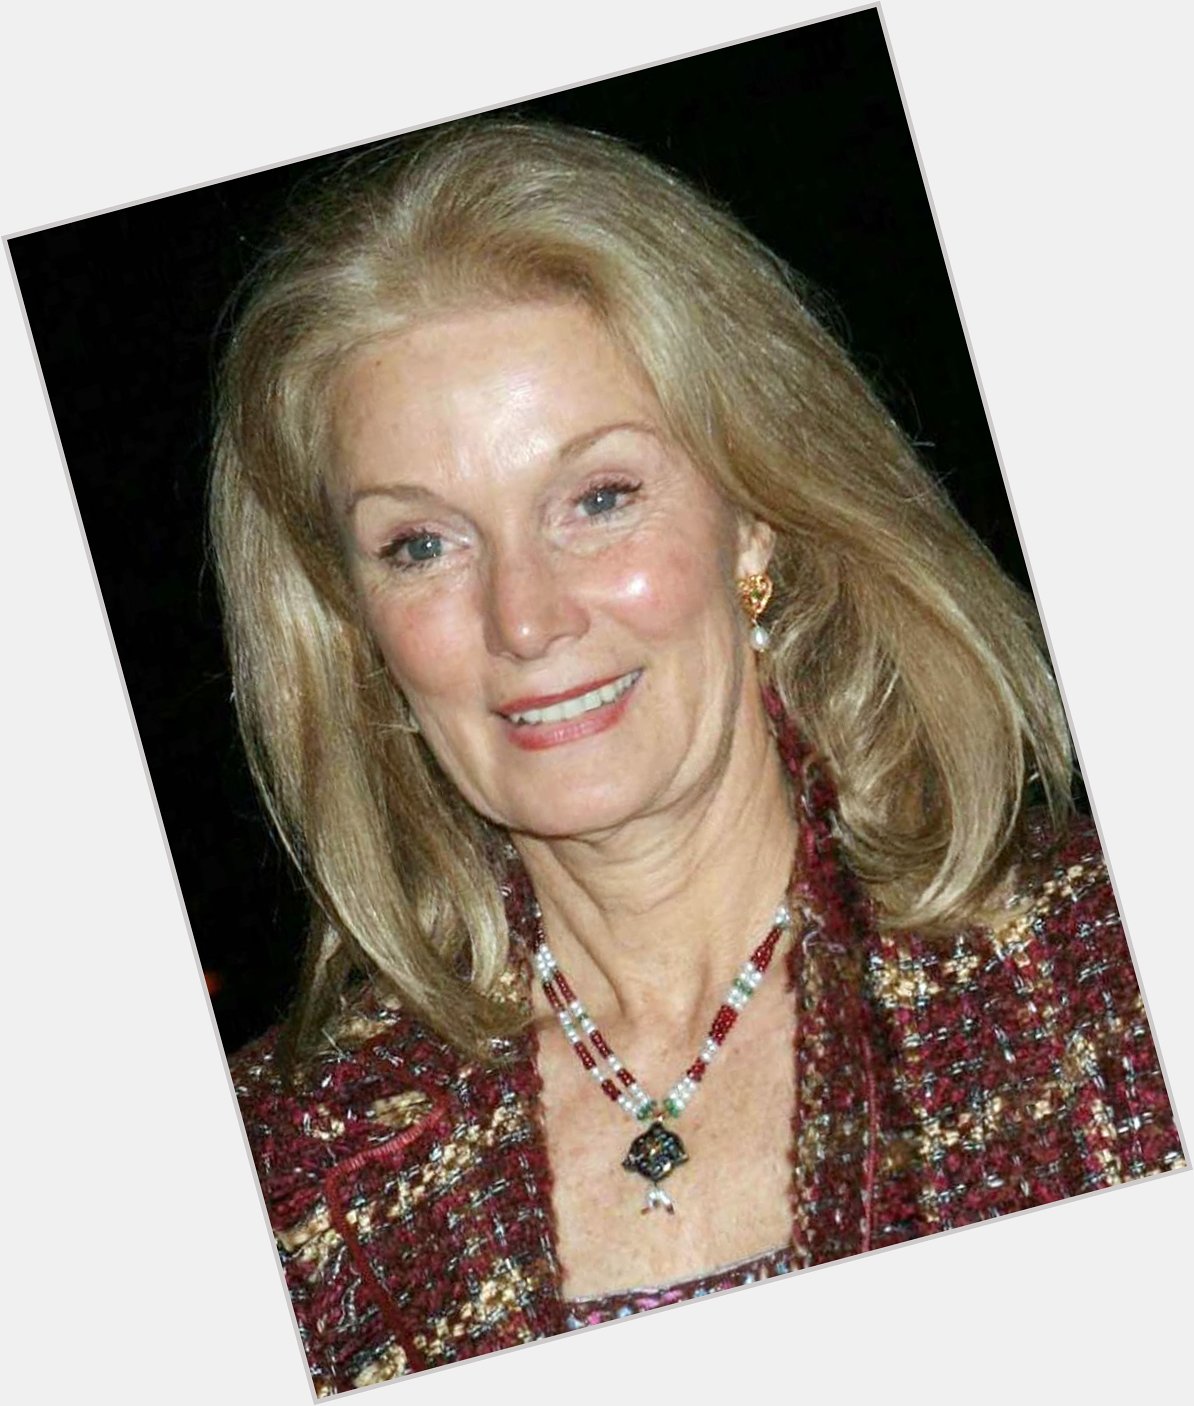 HAPPY 77th BIRTHDAY to YVETTE MIMIEUX!! 
Retired American movie and television actress. 